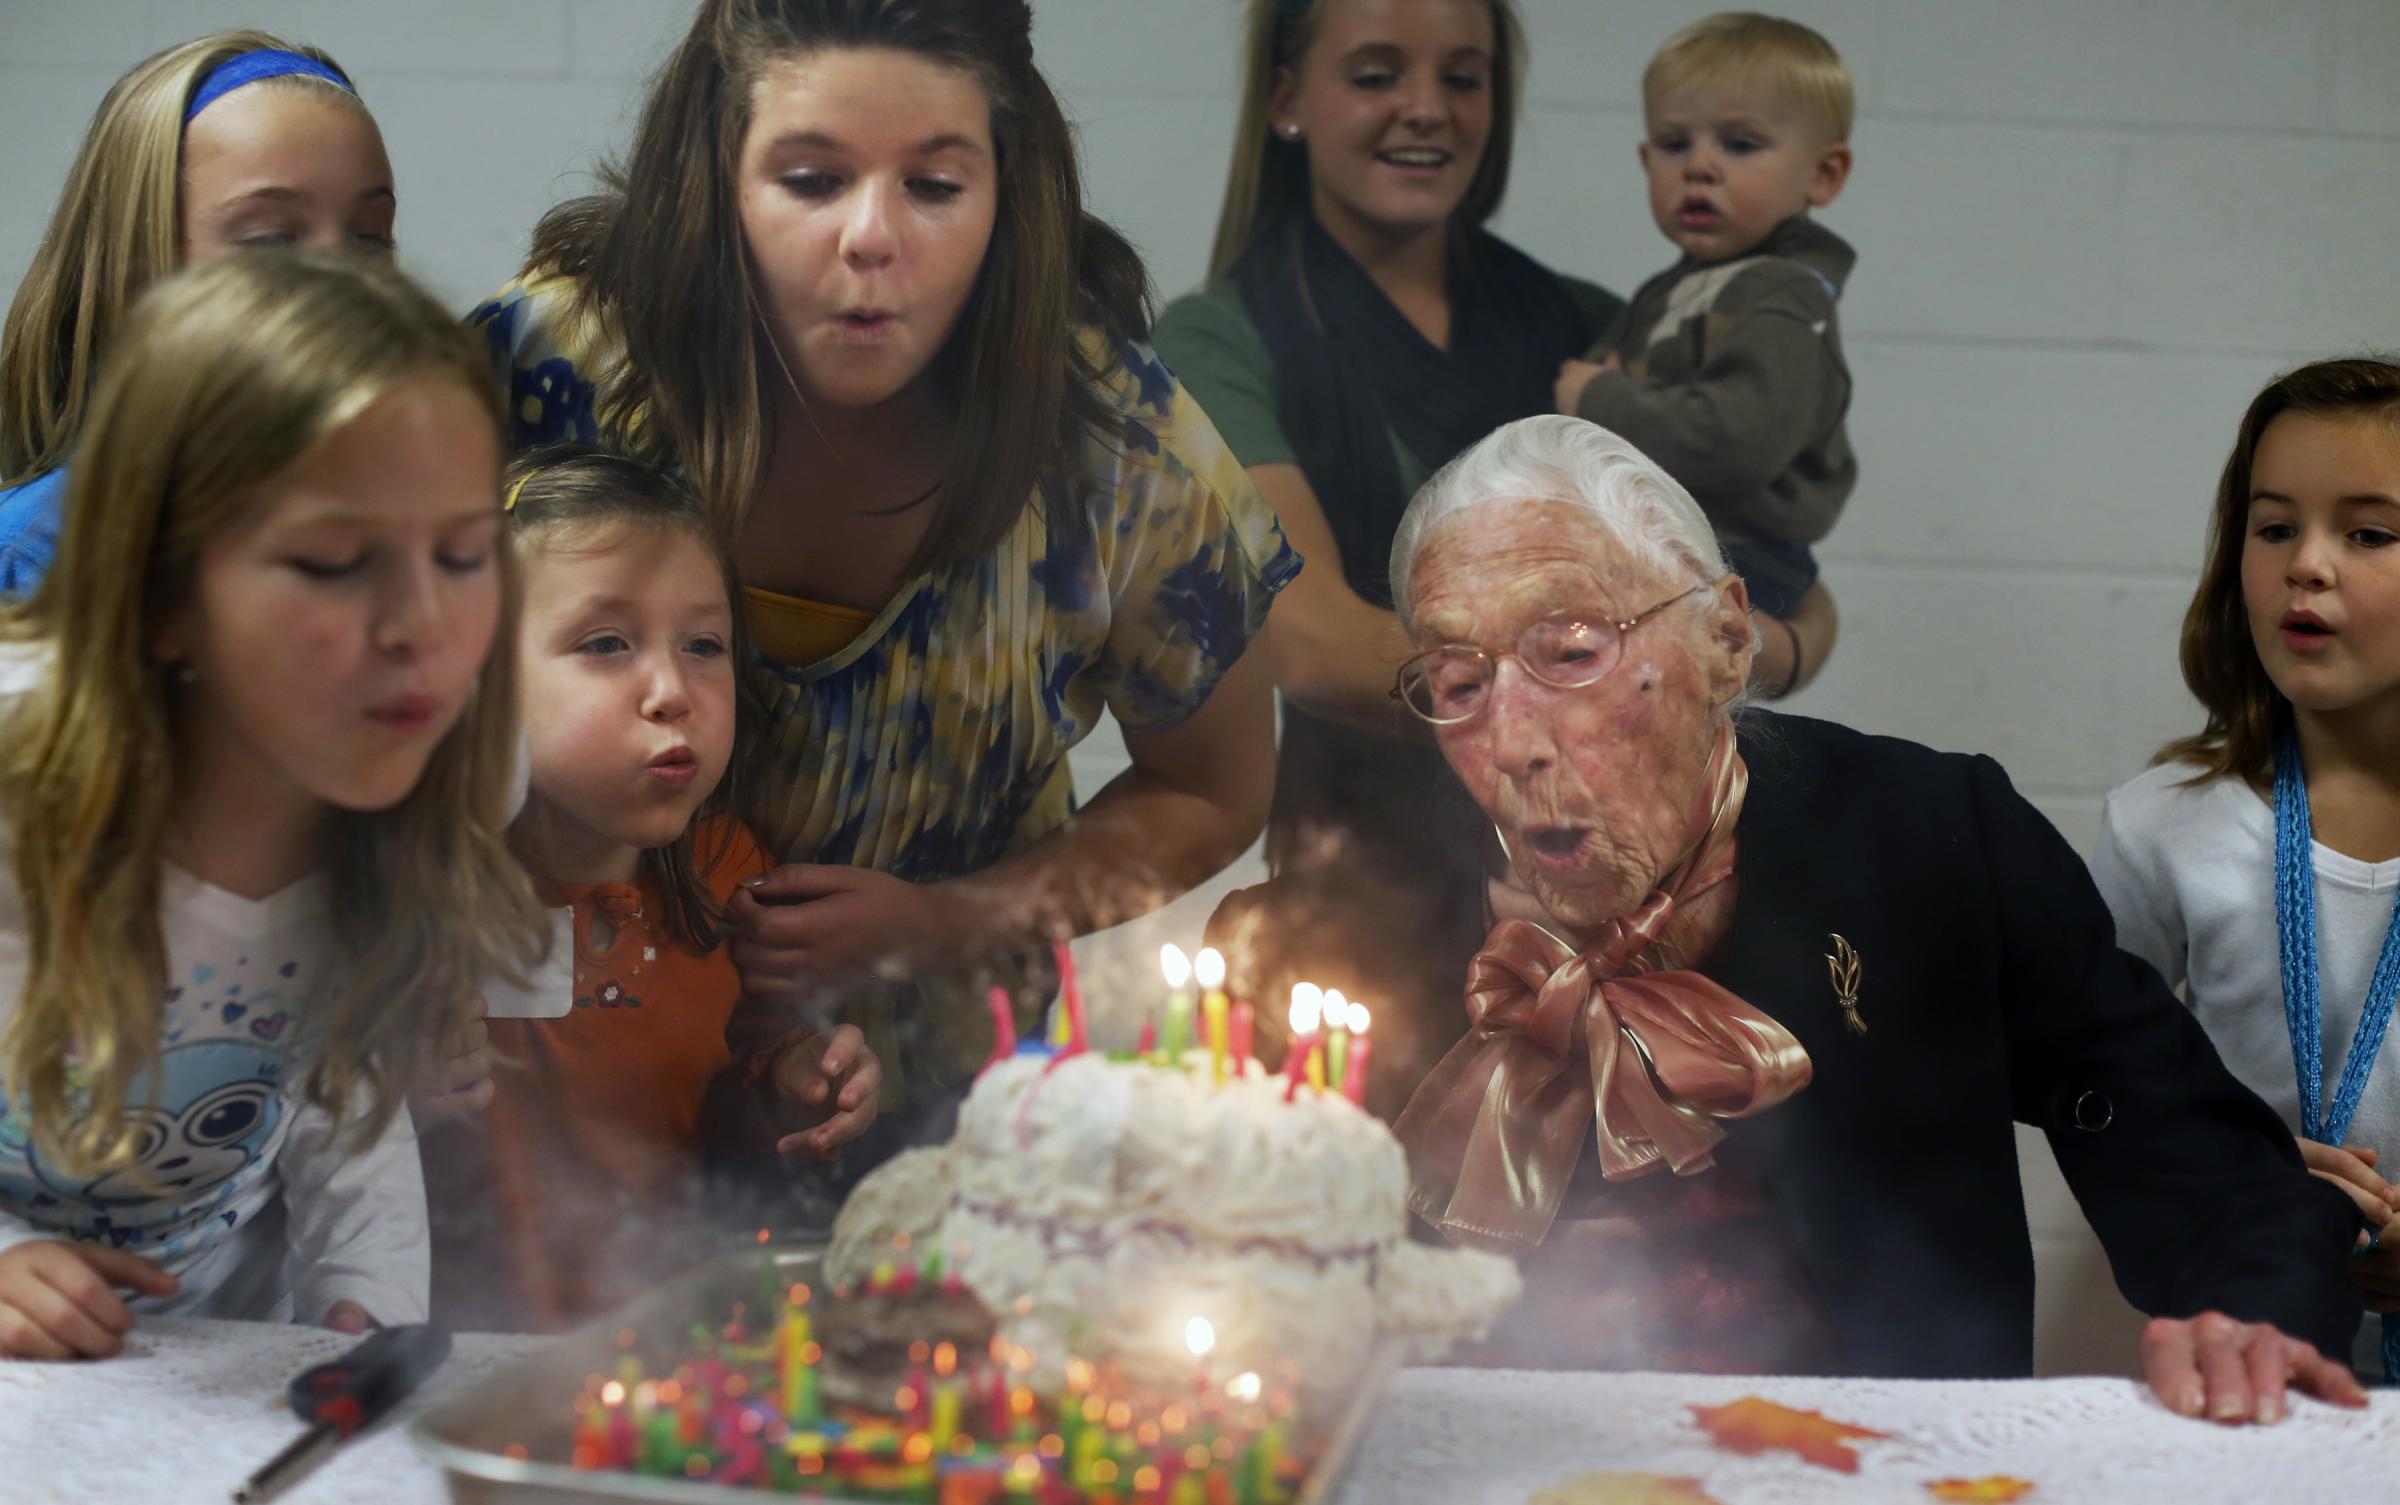 Anna Stoehr blew out the 112 candles on her birthday cake with the help of her great grandchildren on Oct. 14, 2012 in Millville, Minn., where about 180 invited guests celebrated Stoehr's birthday. Stoehr is believed to be the oldest independently living person in the world.